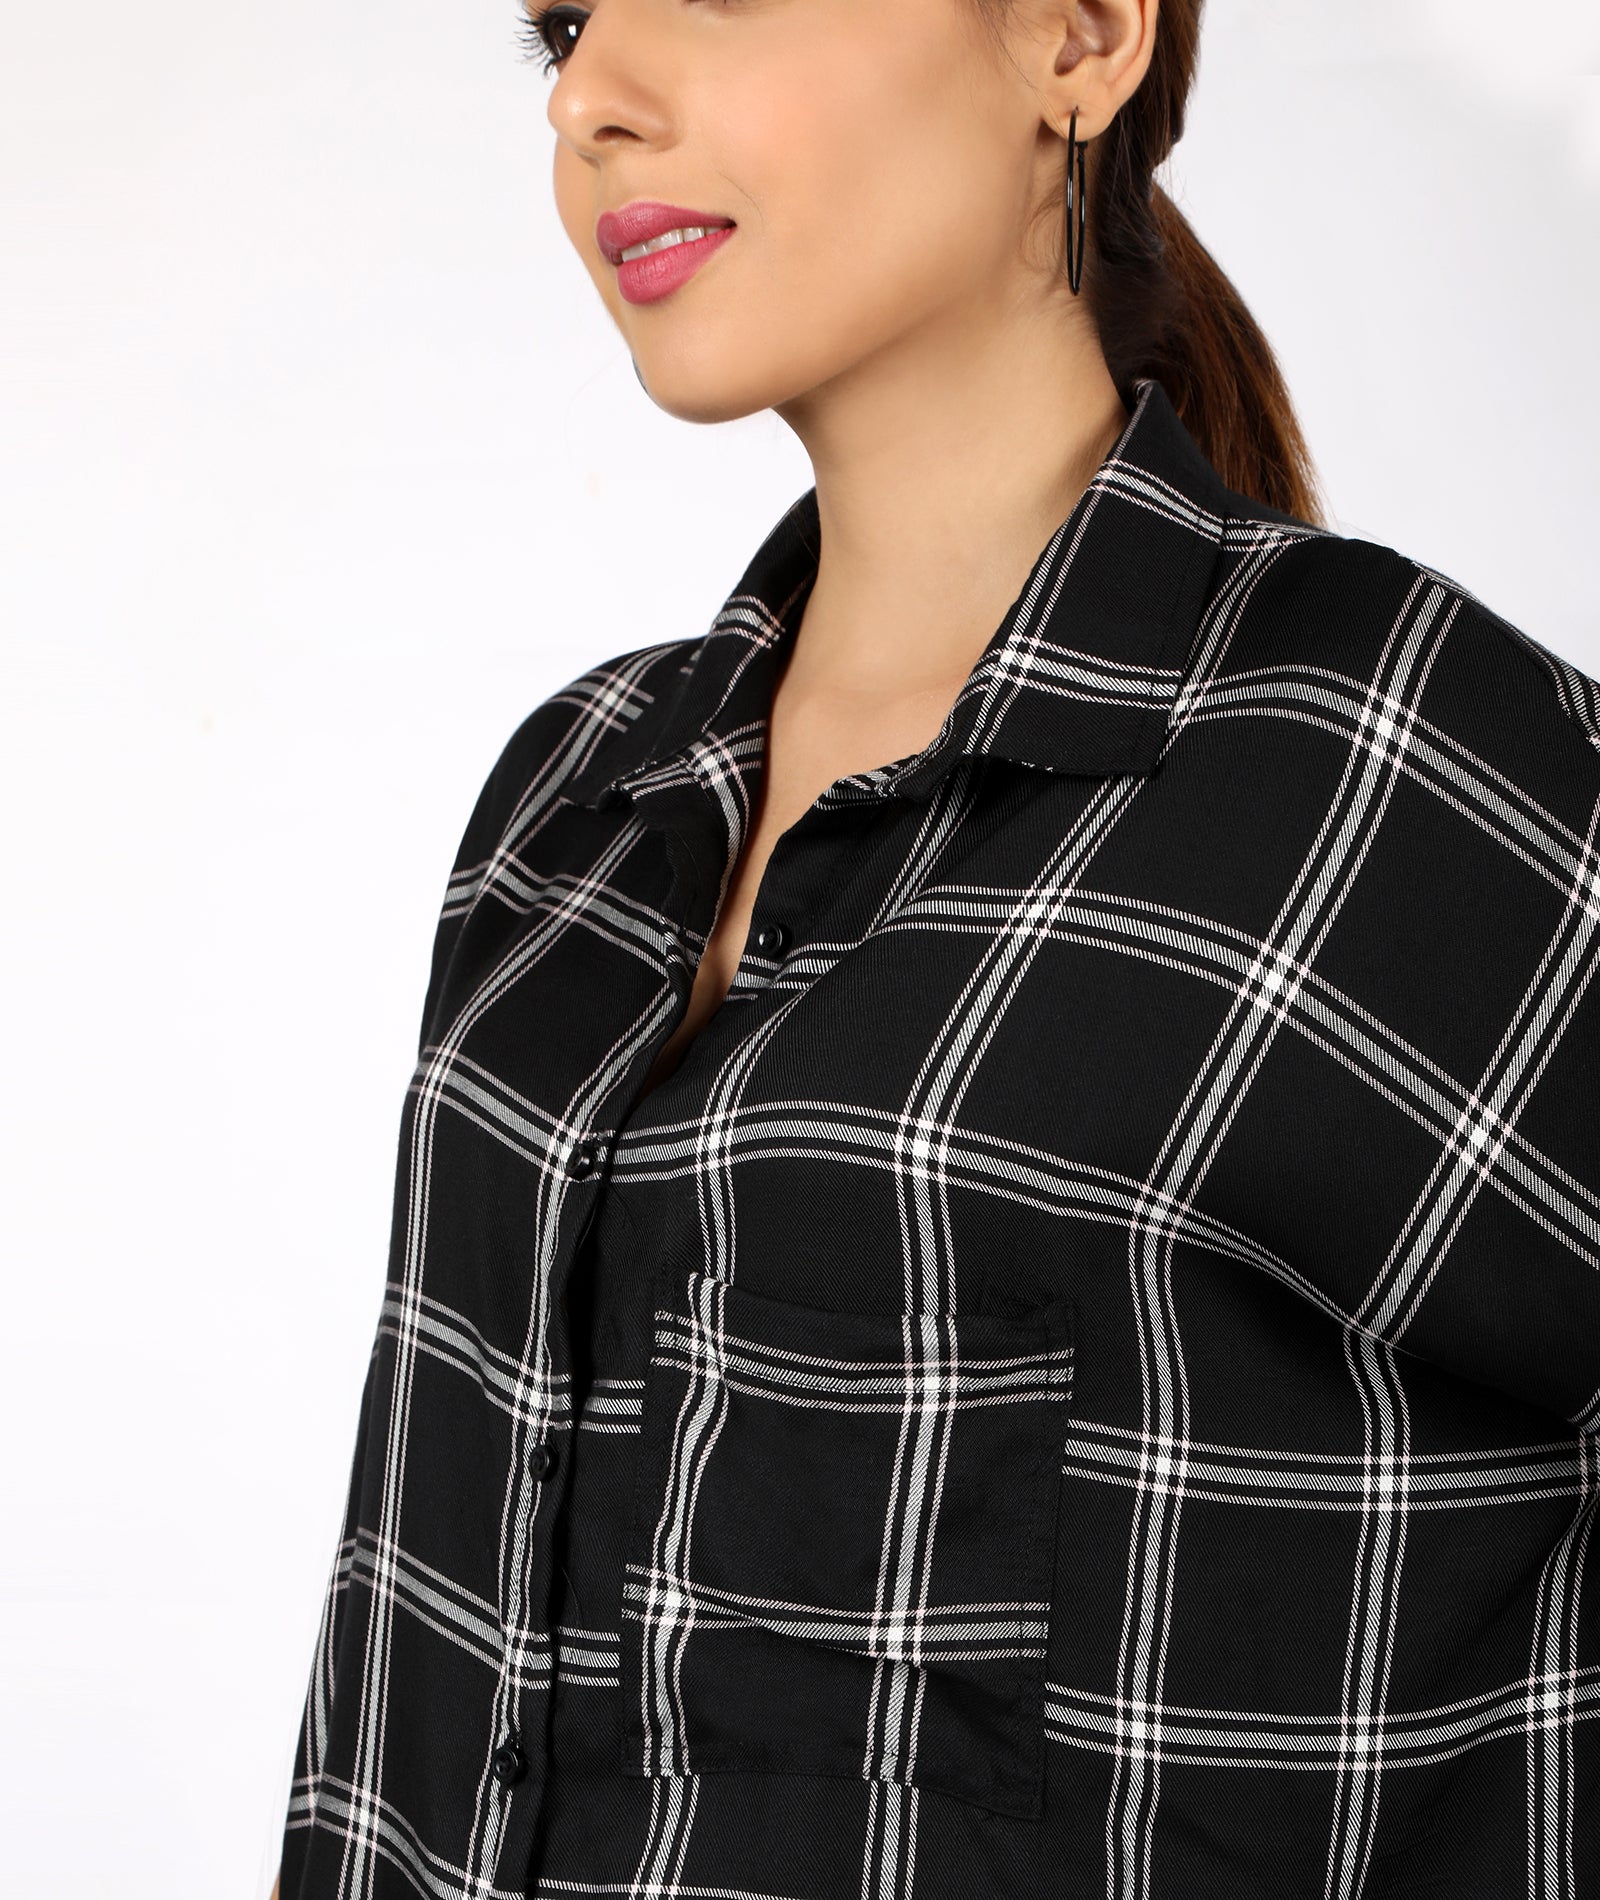 Buy online Long Sleeved Checkered Crop Shirt from western wear for Women by  Chimpaaanzee for ₹500 at 50% off